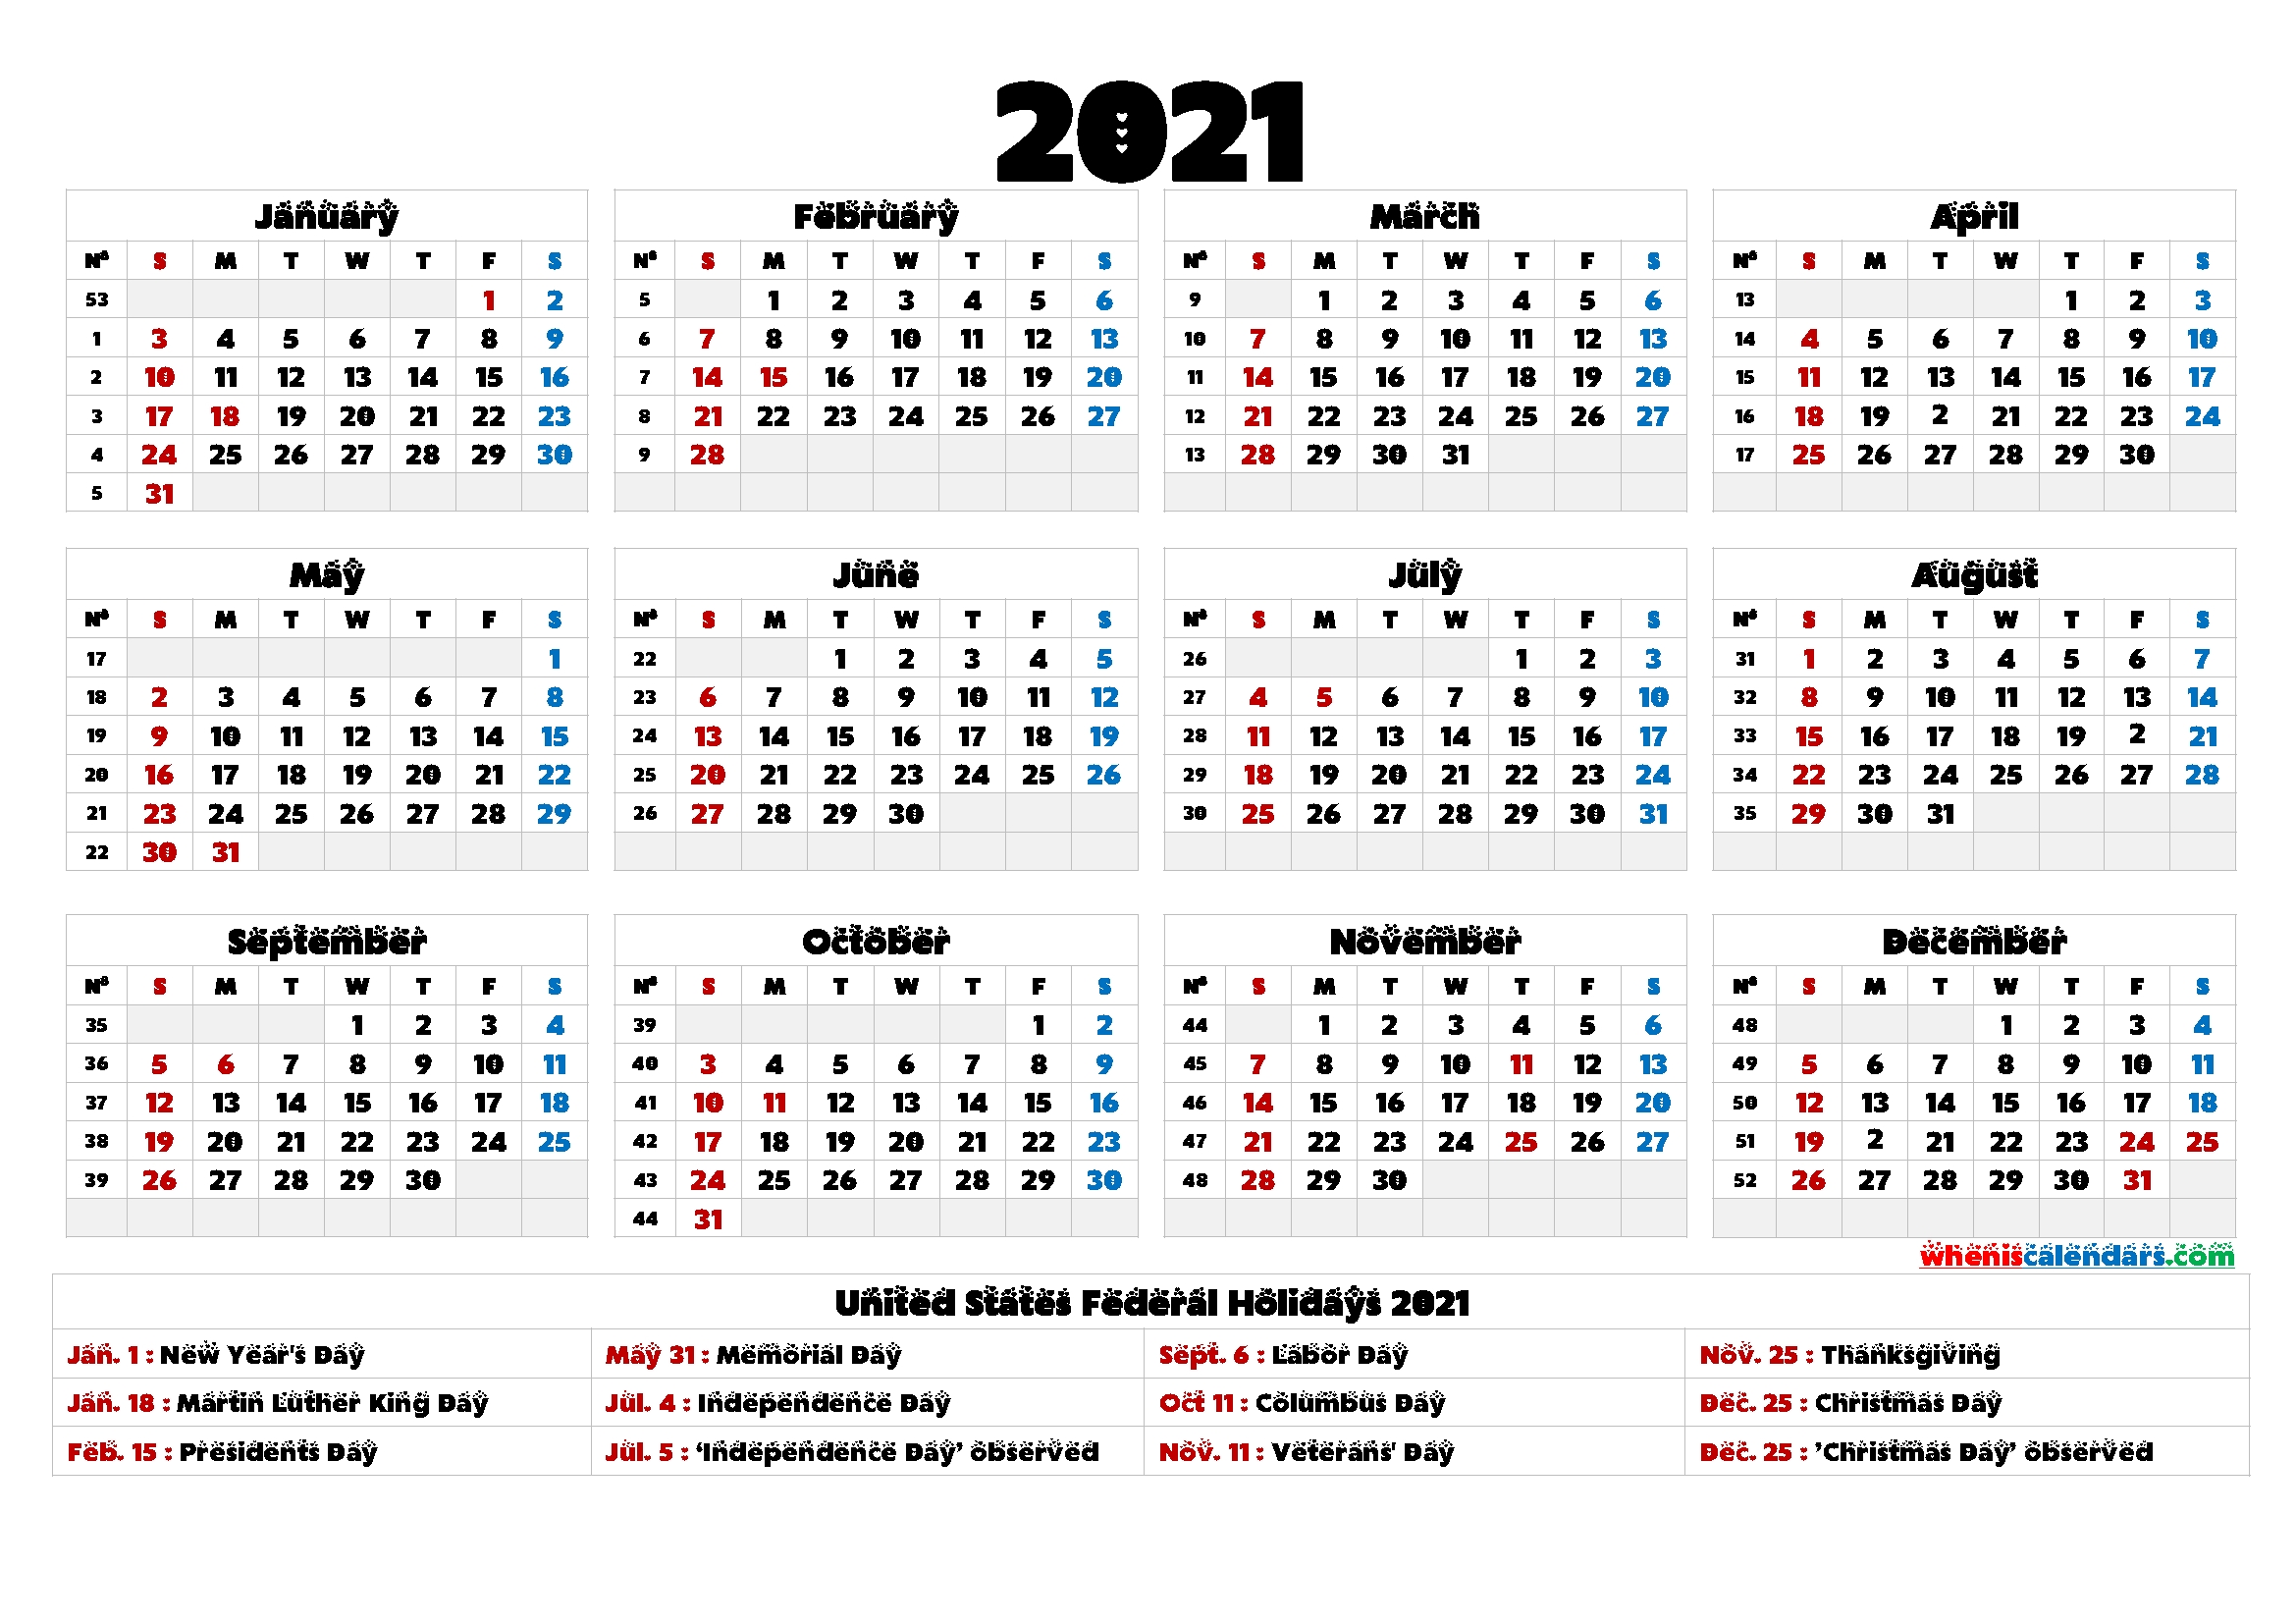 4Mmonth Calendar On One Page 2021 - Example Calendar Printable